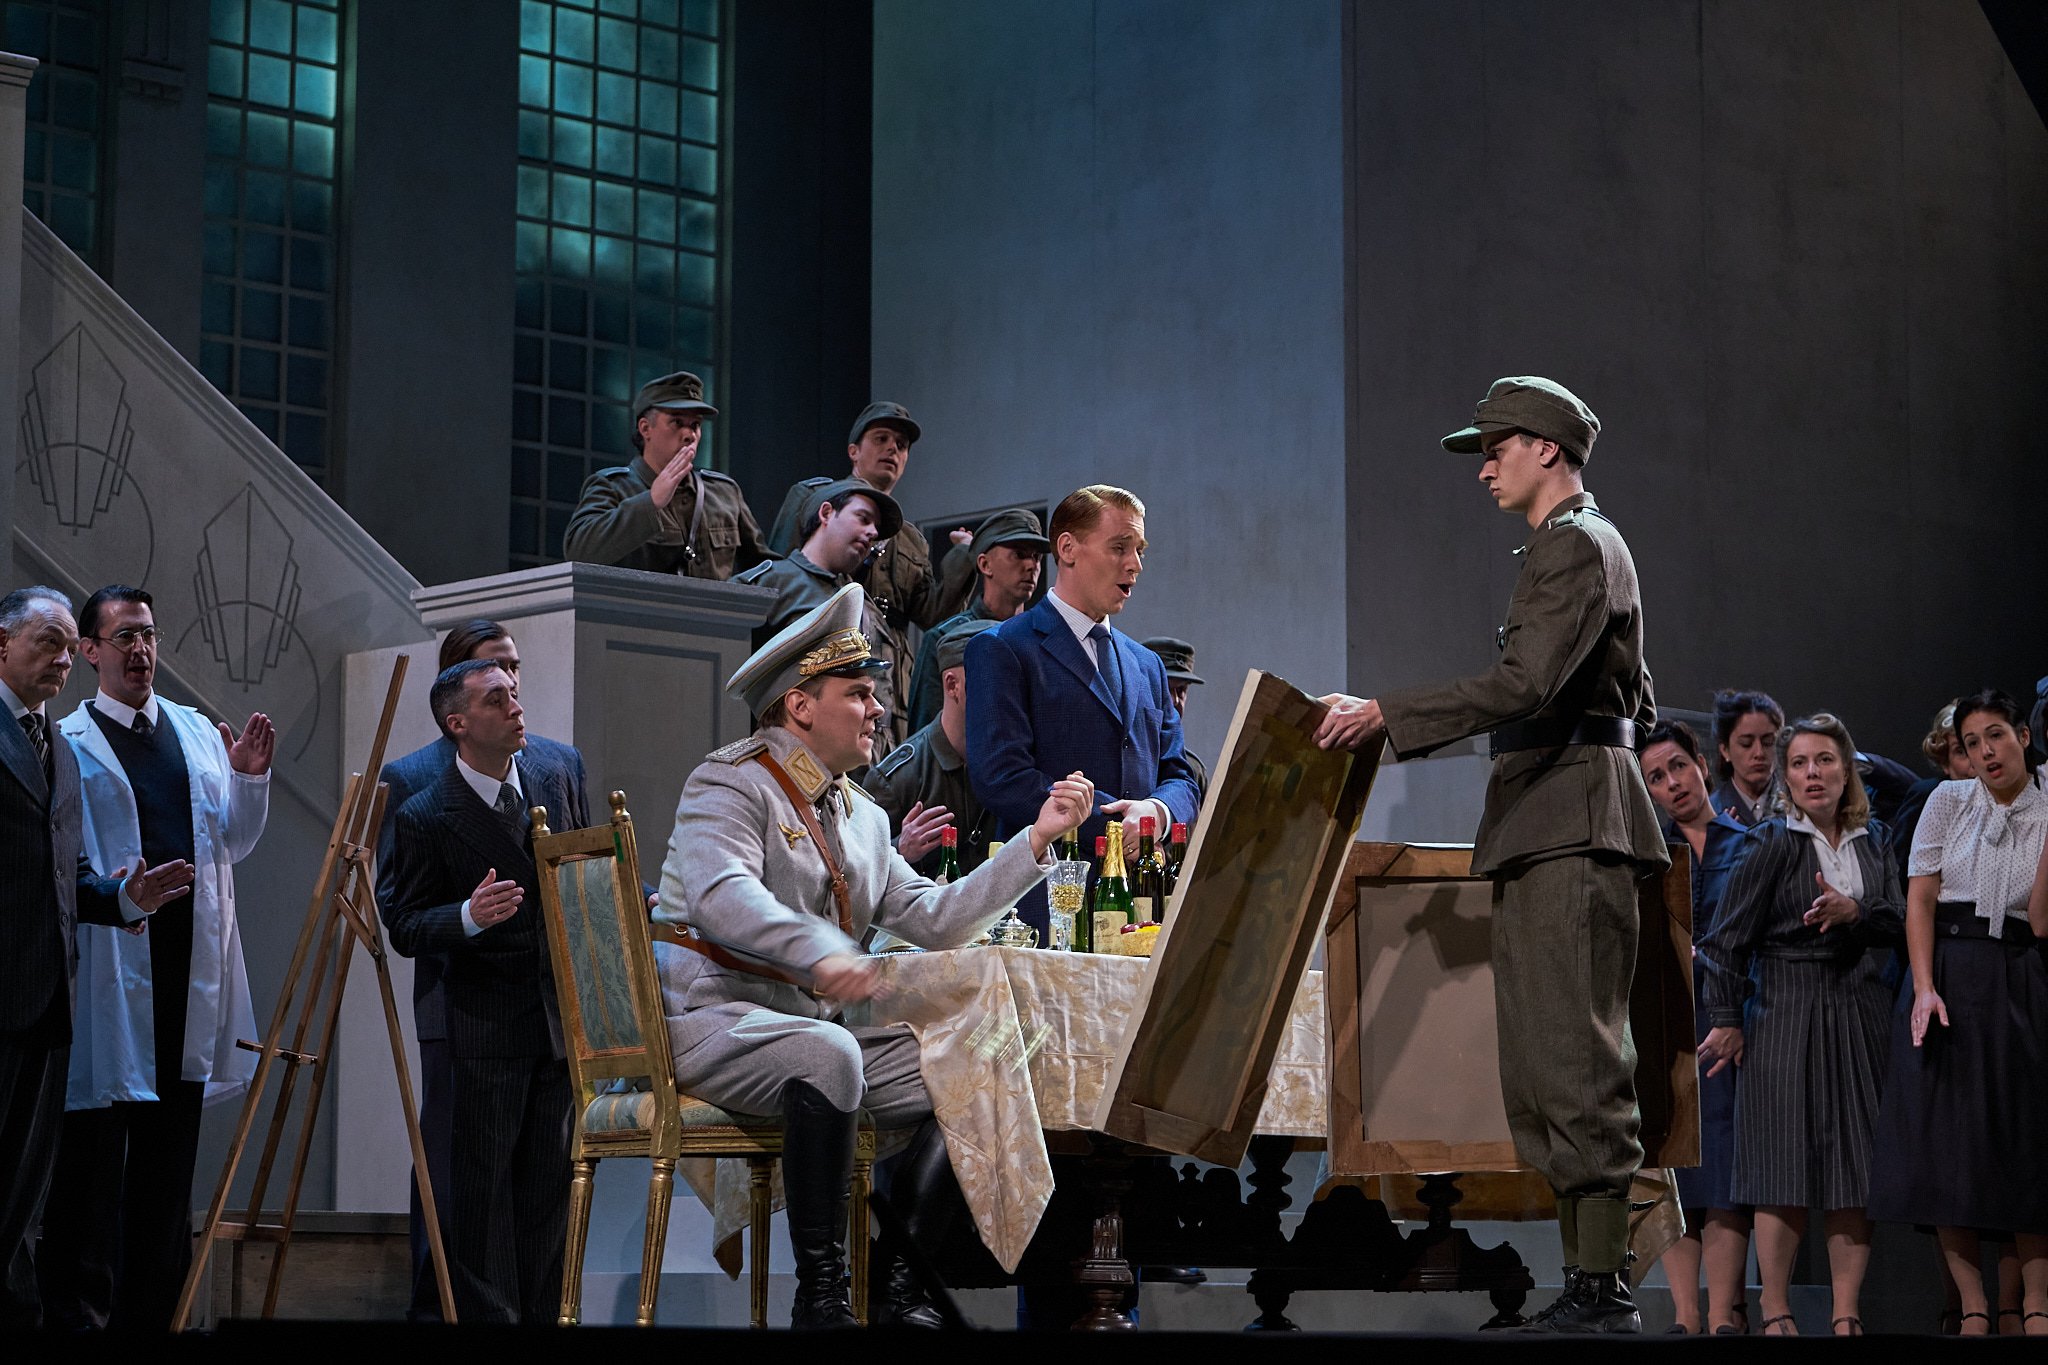  “It is necessary to underline the diabolical and vicious personification that Matthew Dalen makes of Hermann Göring, one of the memorable performances of this production.” - Revue l’Opera Québec (La beauté du monde, 2022) 